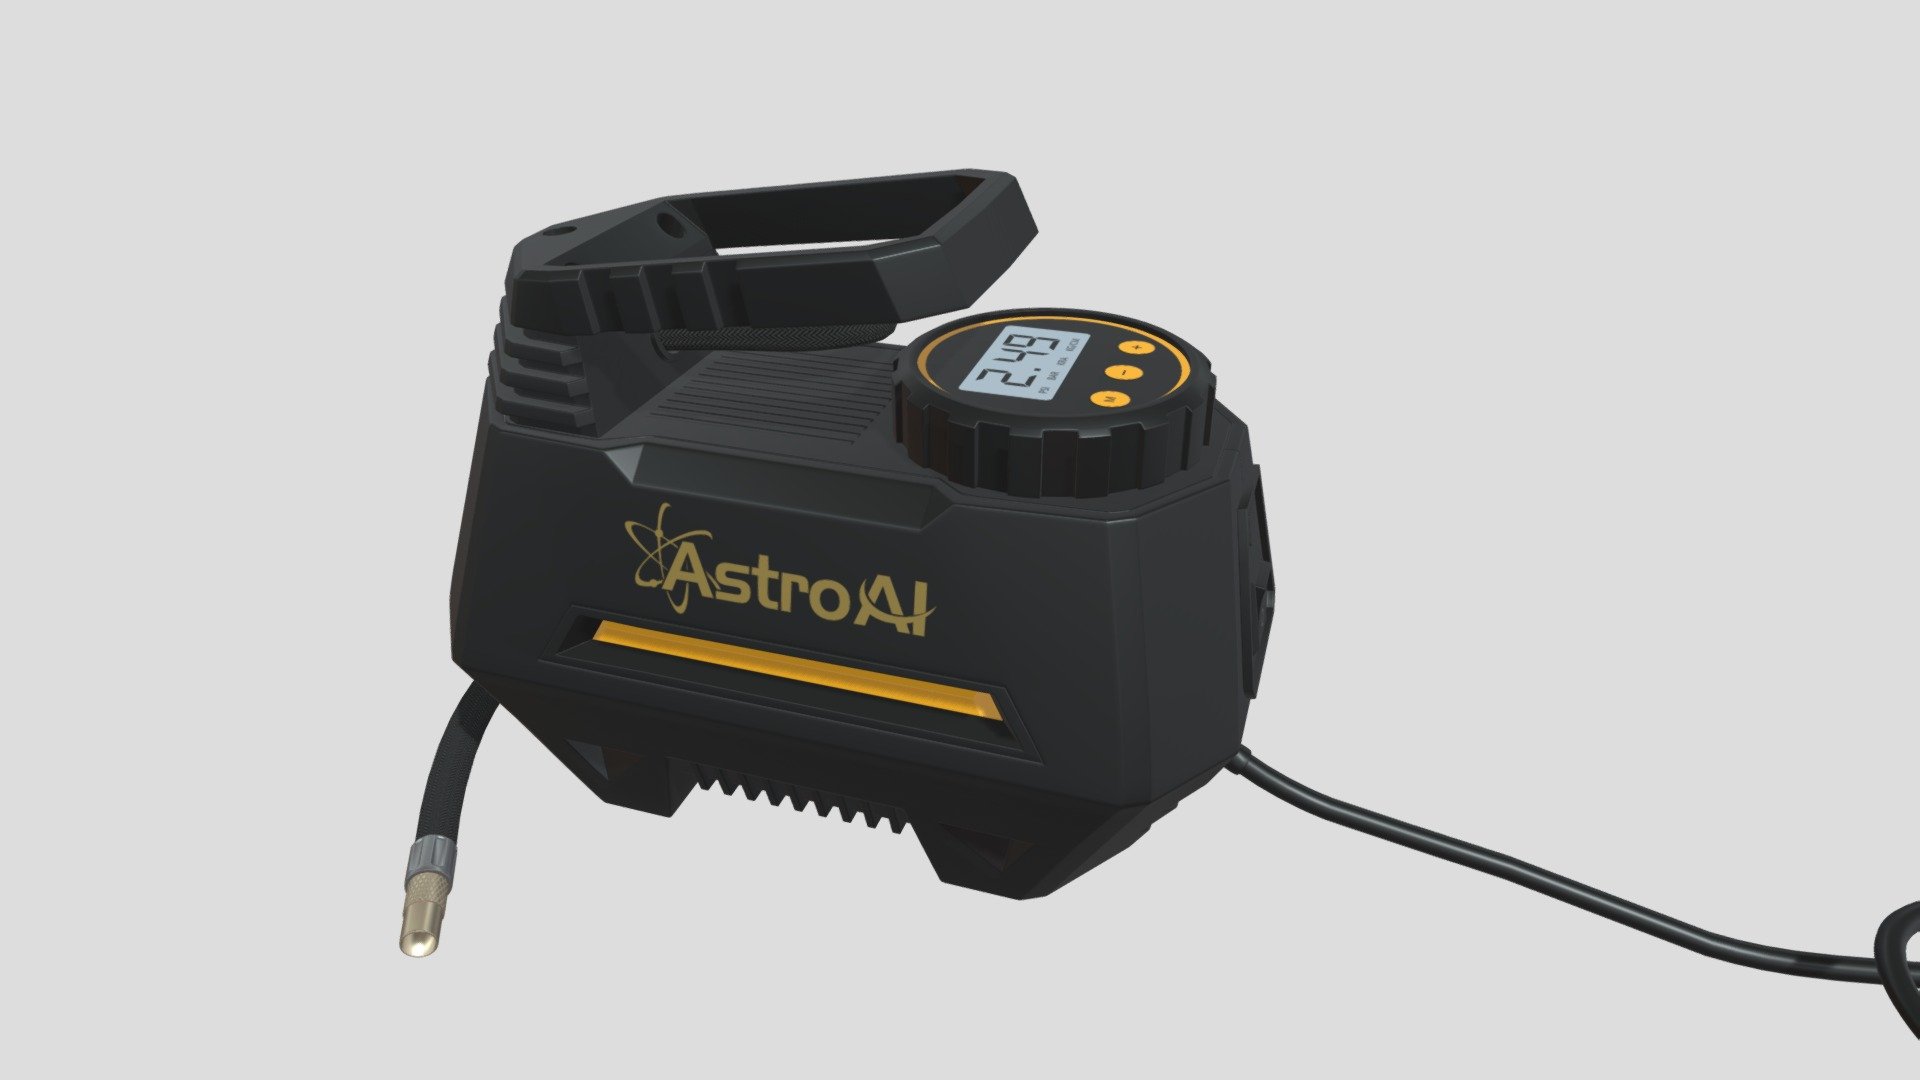 3D model of AstroAI Air Compressor  , with good topology and already textured.

Format： FBX

Textures (4k PNG files, 4096*4096 ) include: base color , roughness, metallic, opacity and normal map

Polygon count: 69300

UV mapped

Feel free to contact me if you have any questions

AstroAI Air Compressor Tire Inflator Portable Air Pump for Car Tires 12V DC Auto Tire Pump with Digital Pressure Gauge, 100PSI with Emergency LED Light for Car, Bicycle, Balloons and Other Inflatables - AstroAI Air Compressor - Buy Royalty Free 3D model by Chloe-Li-3D 3d model